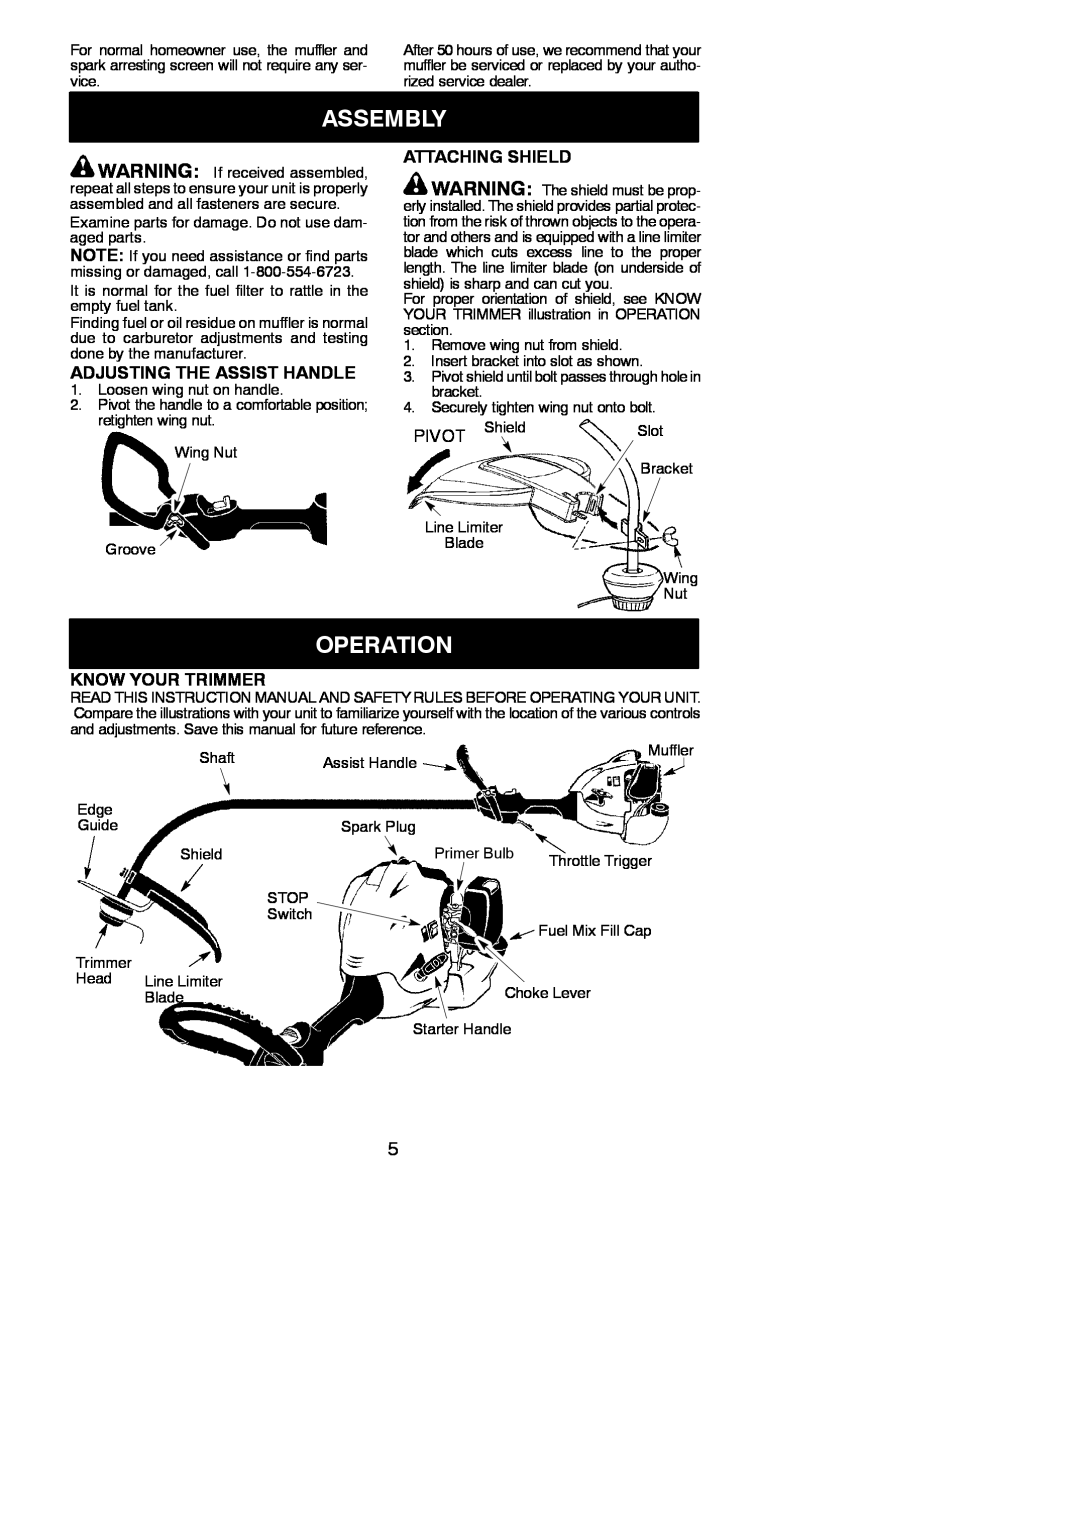 Weed Eater 952711797 Assembly, Operation, Adjusting The Assist Handle, Attaching Shield, PIVOT Shield, Know Your Trimmer 